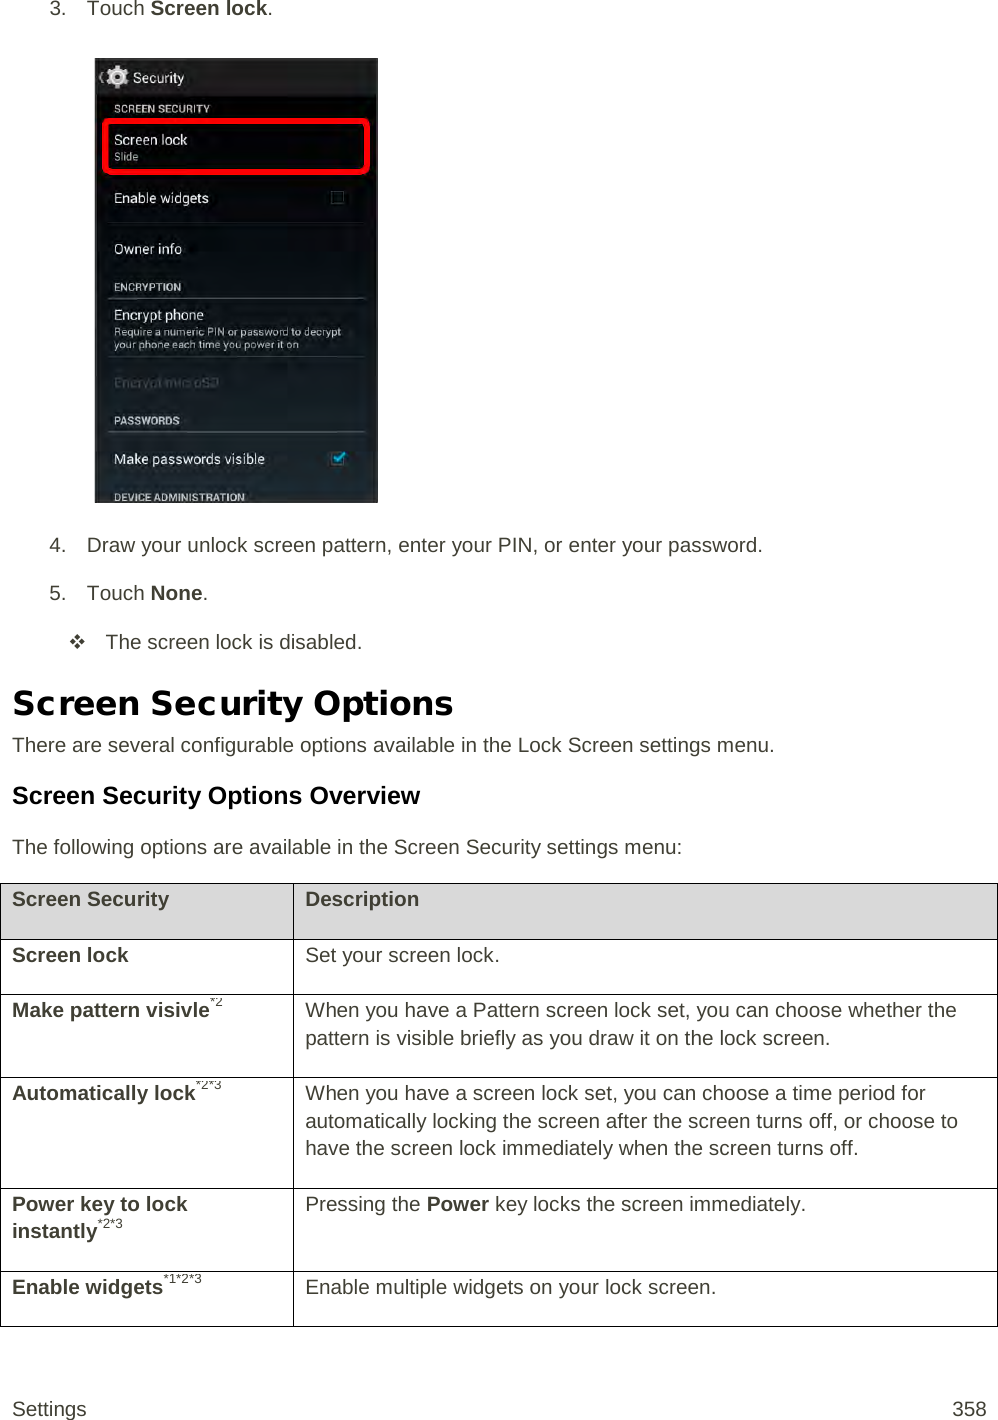 3. Touch Screen lock.   4. Draw your unlock screen pattern, enter your PIN, or enter your password. 5. Touch None.  The screen lock is disabled. Screen Security Options There are several configurable options available in the Lock Screen settings menu. Screen Security Options Overview The following options are available in the Screen Security settings menu: Screen Security Description Screen lock Set your screen lock. Make pattern visivle*2 When you have a Pattern screen lock set, you can choose whether the pattern is visible briefly as you draw it on the lock screen. Automatically lock*2*3 When you have a screen lock set, you can choose a time period for automatically locking the screen after the screen turns off, or choose to have the screen lock immediately when the screen turns off. Power key to lock instantly*2*3 Pressing the Power key locks the screen immediately. Enable widgets*1*2*3 Enable multiple widgets on your lock screen. Settings 358 